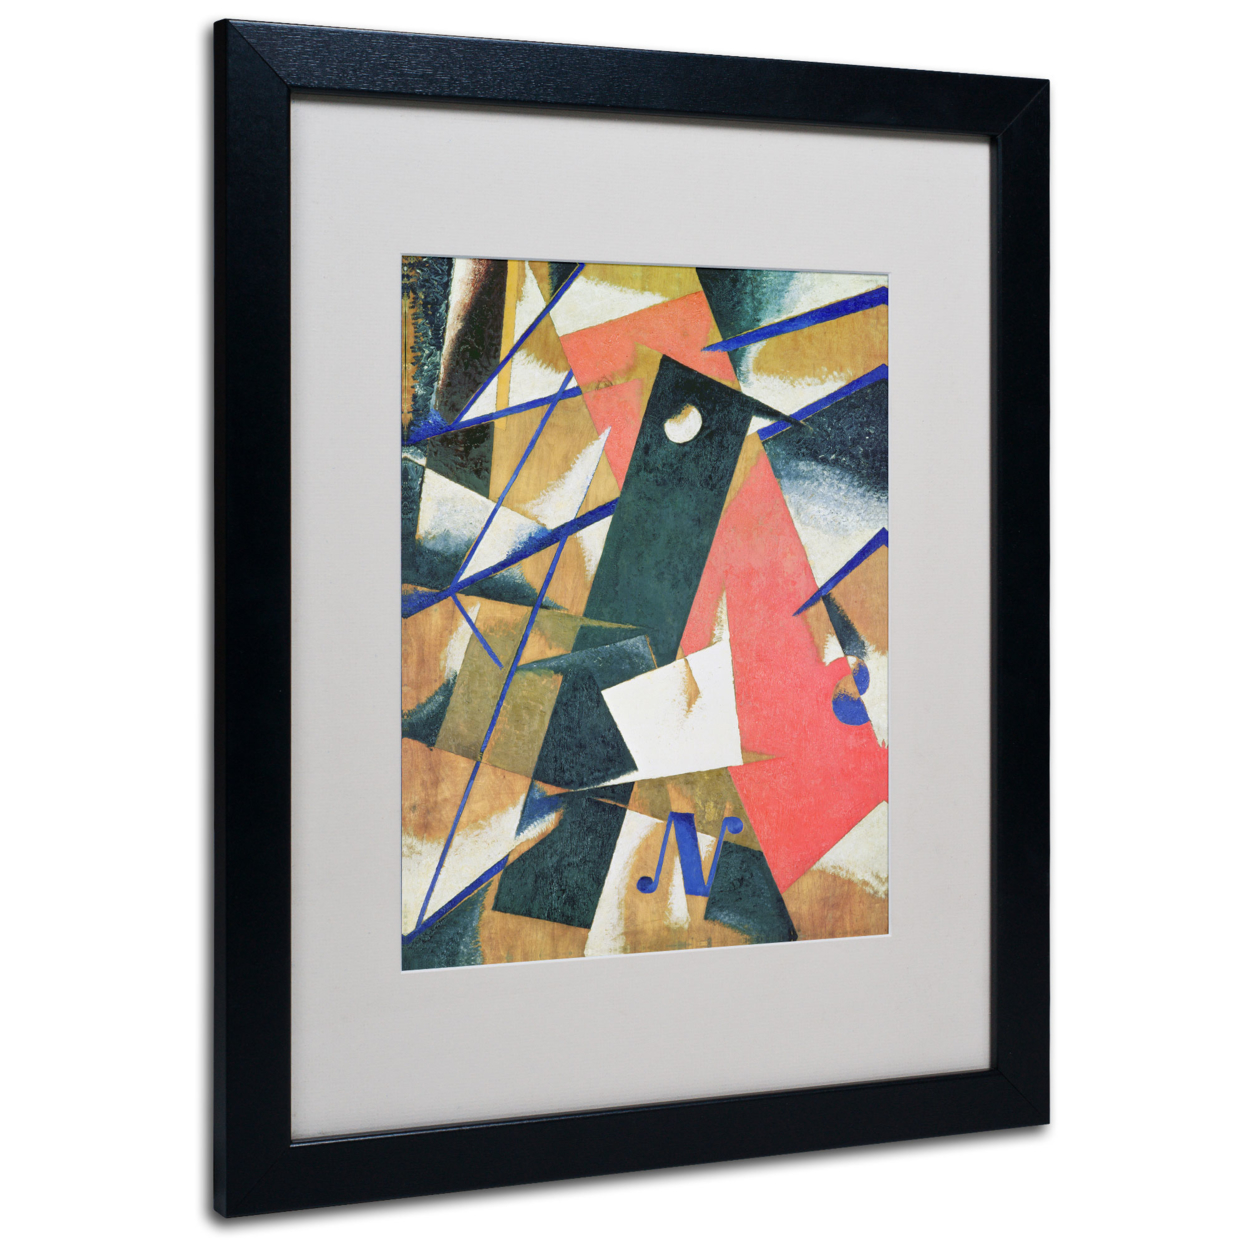 Abstract II' Black Wooden Framed Art 18 X 22 Inches